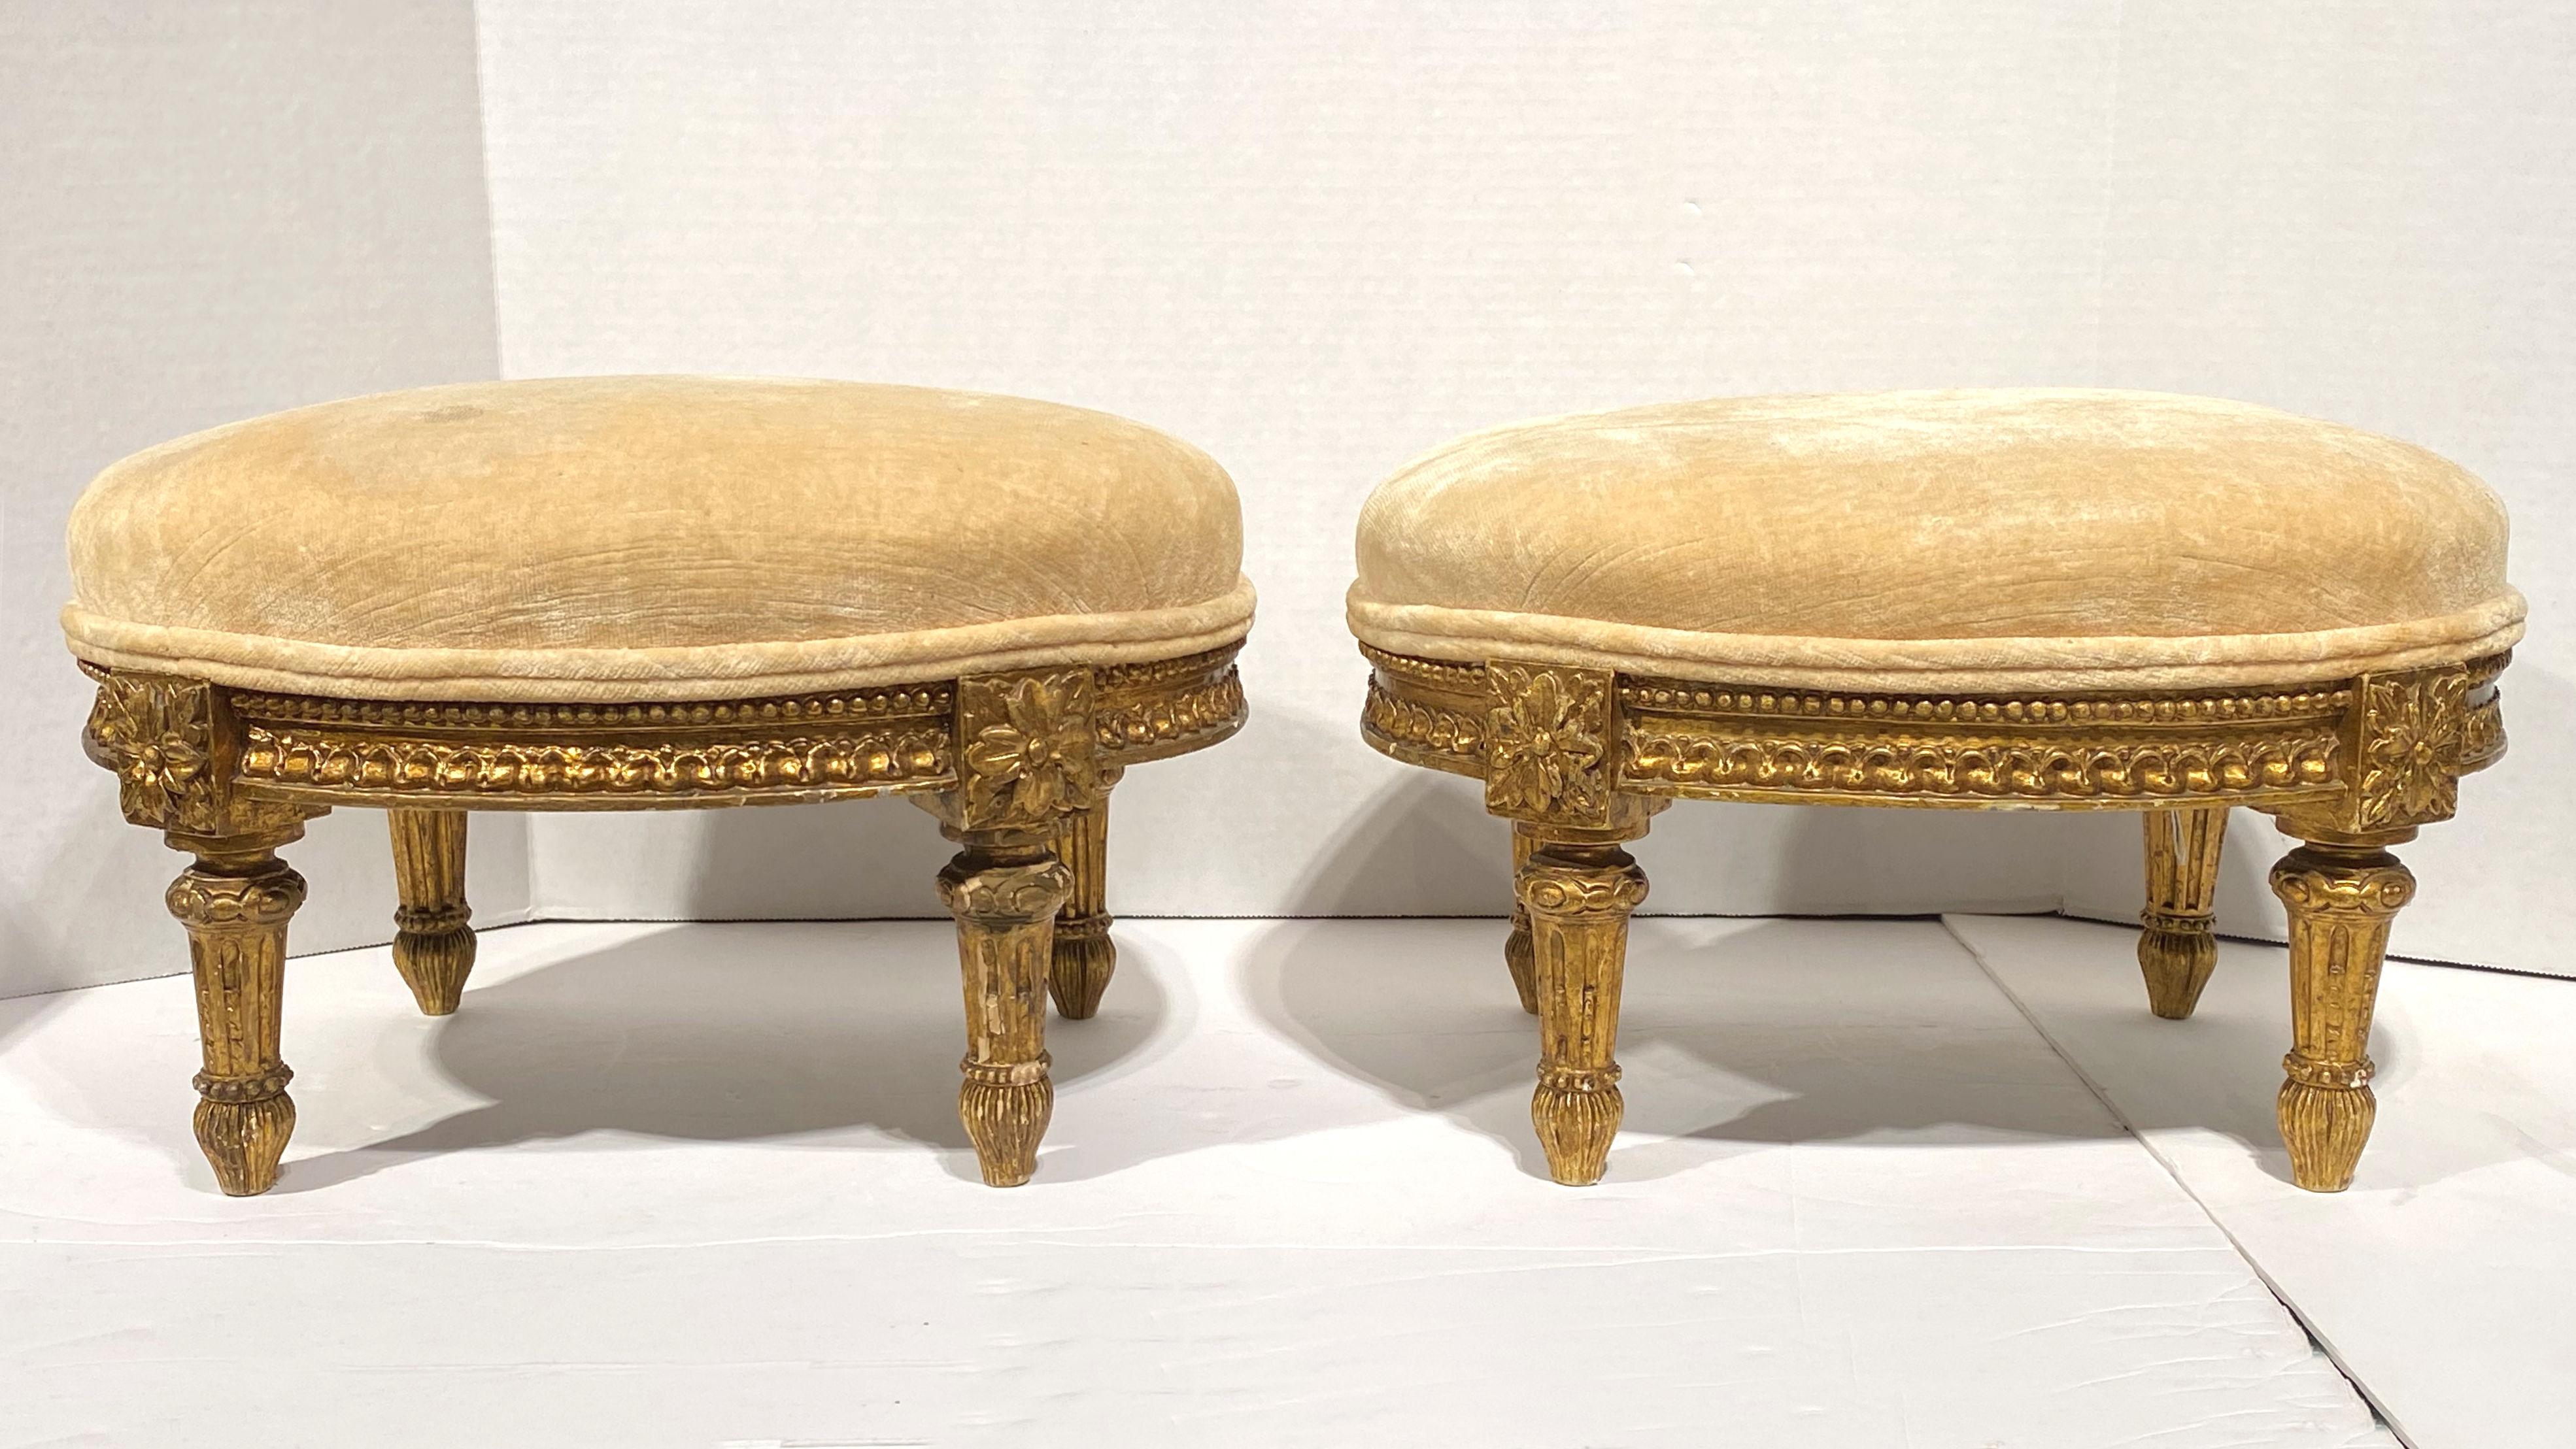 19th Century Pair of Louis XVI Style Giltwood Foot Stools